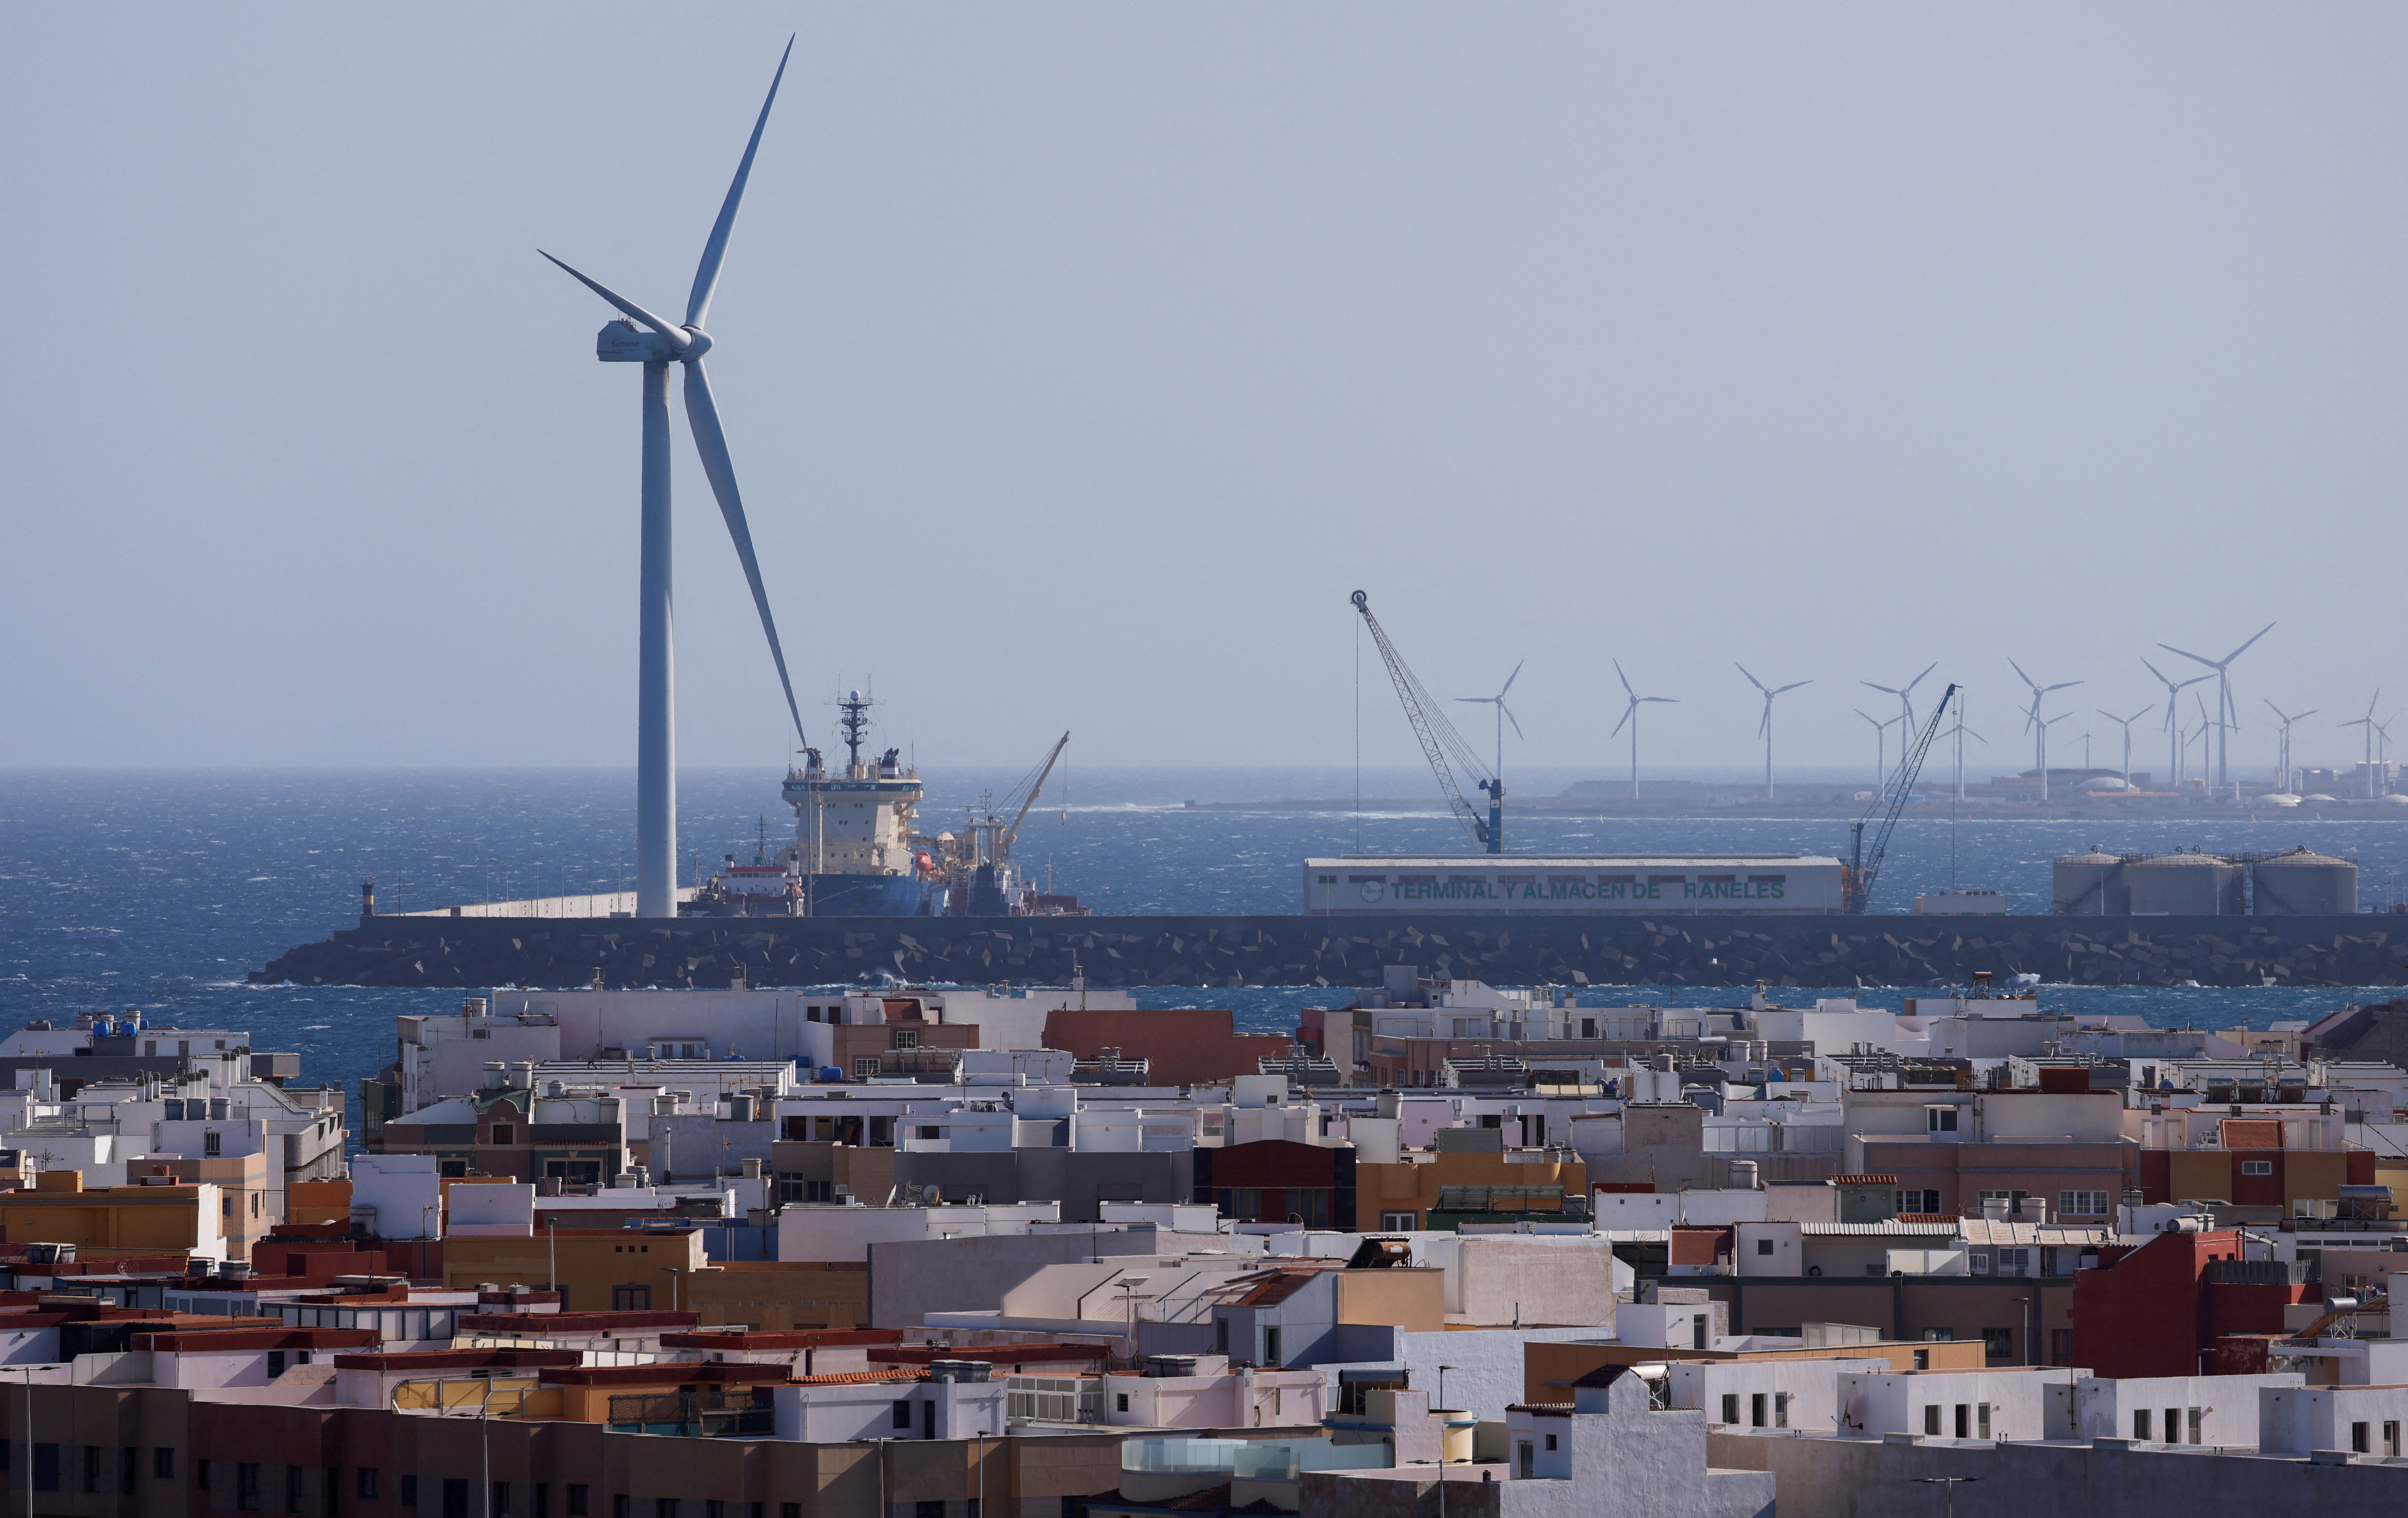 A wind turbine of the Siemens Gamesa company located at the Port of Arinaga is seen from a viewpoint of Arinaga on Gran Canaria Island